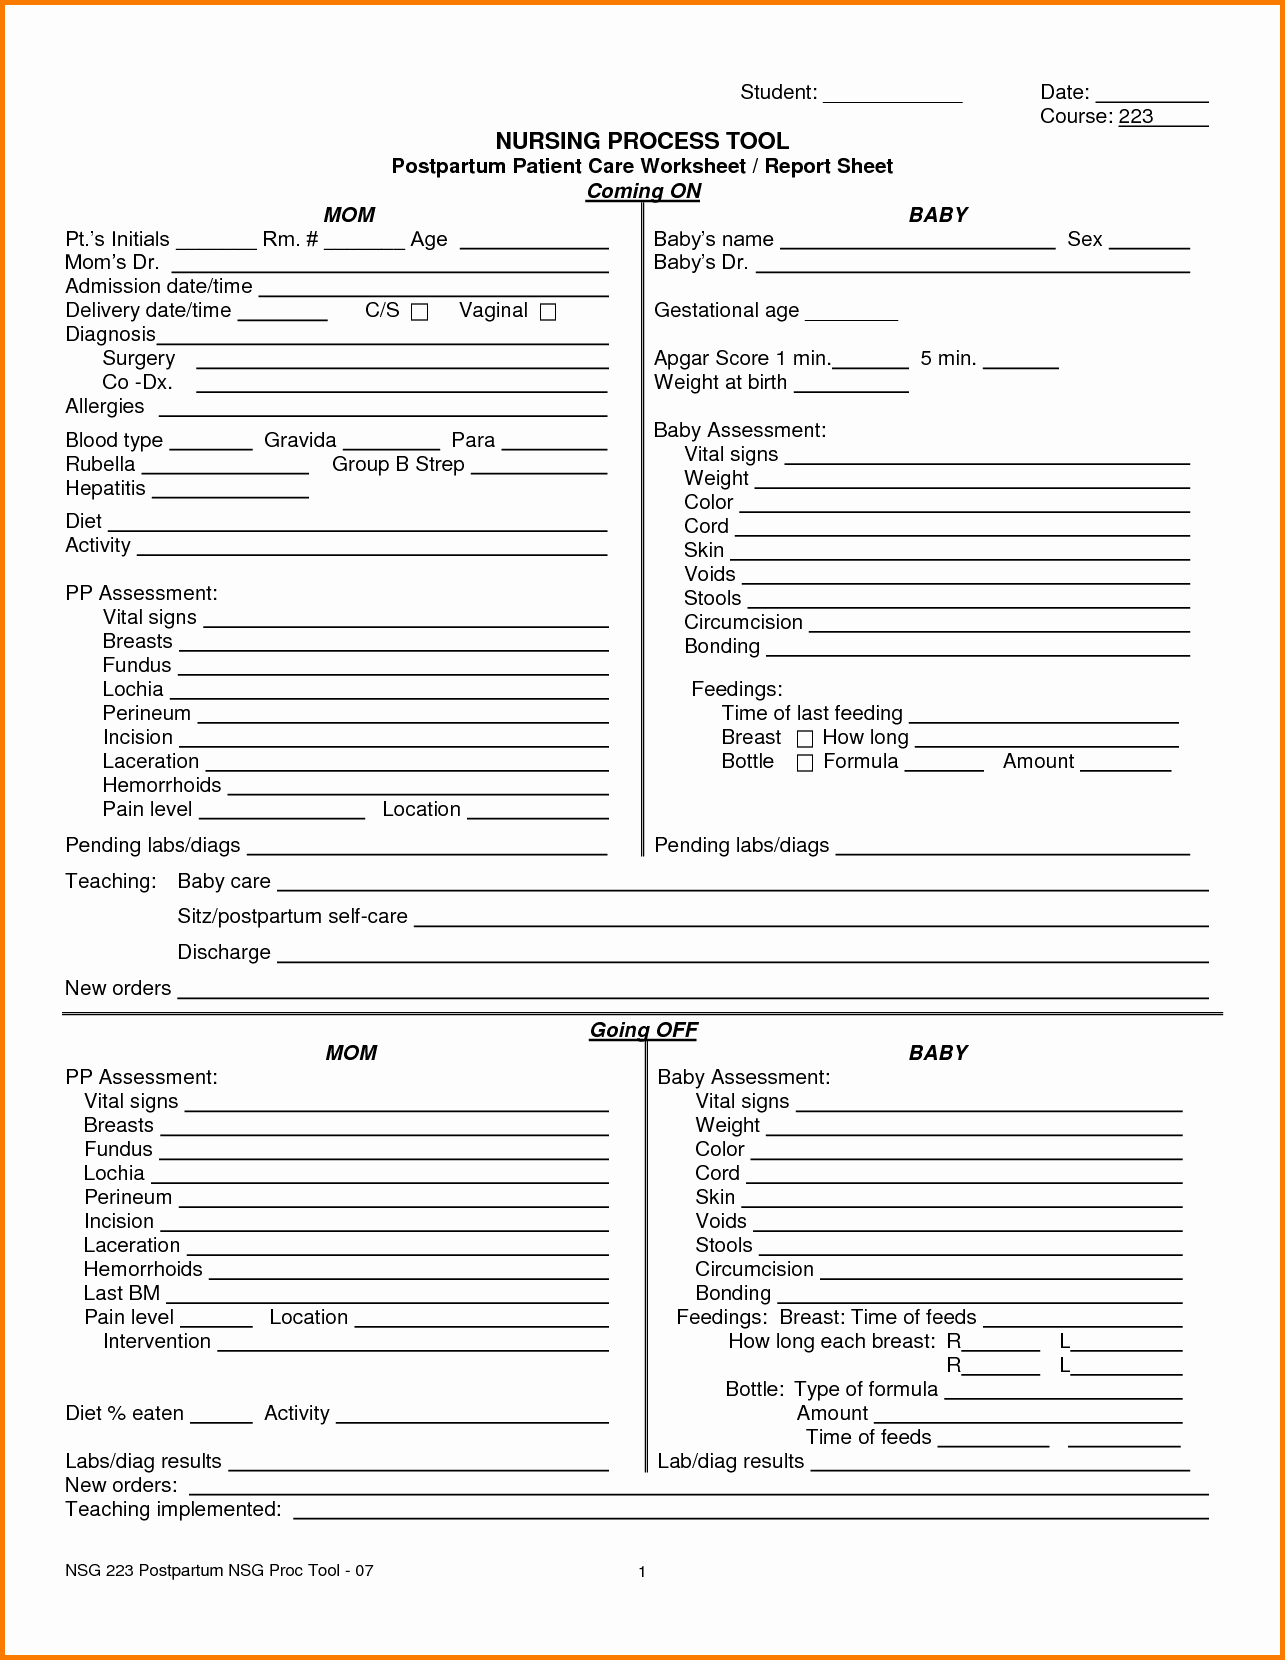 Printable Nurse Report Sheets That Are Critical | Darryl's Blog With Regard To Nursing Report Sheet Templates